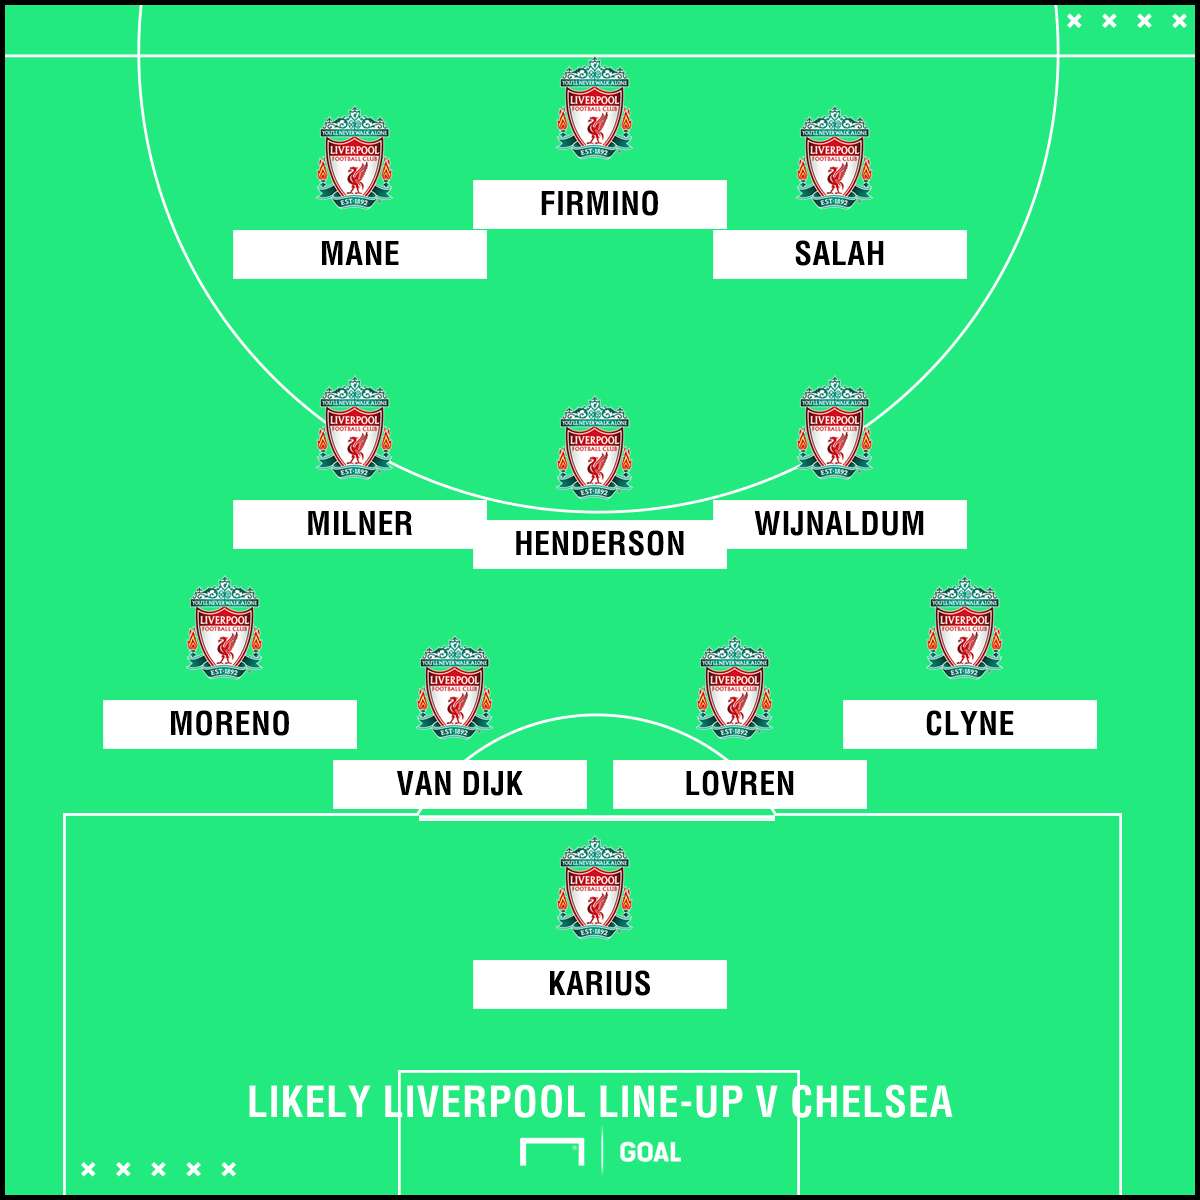 Likely Liverpool line-up v Chelsea